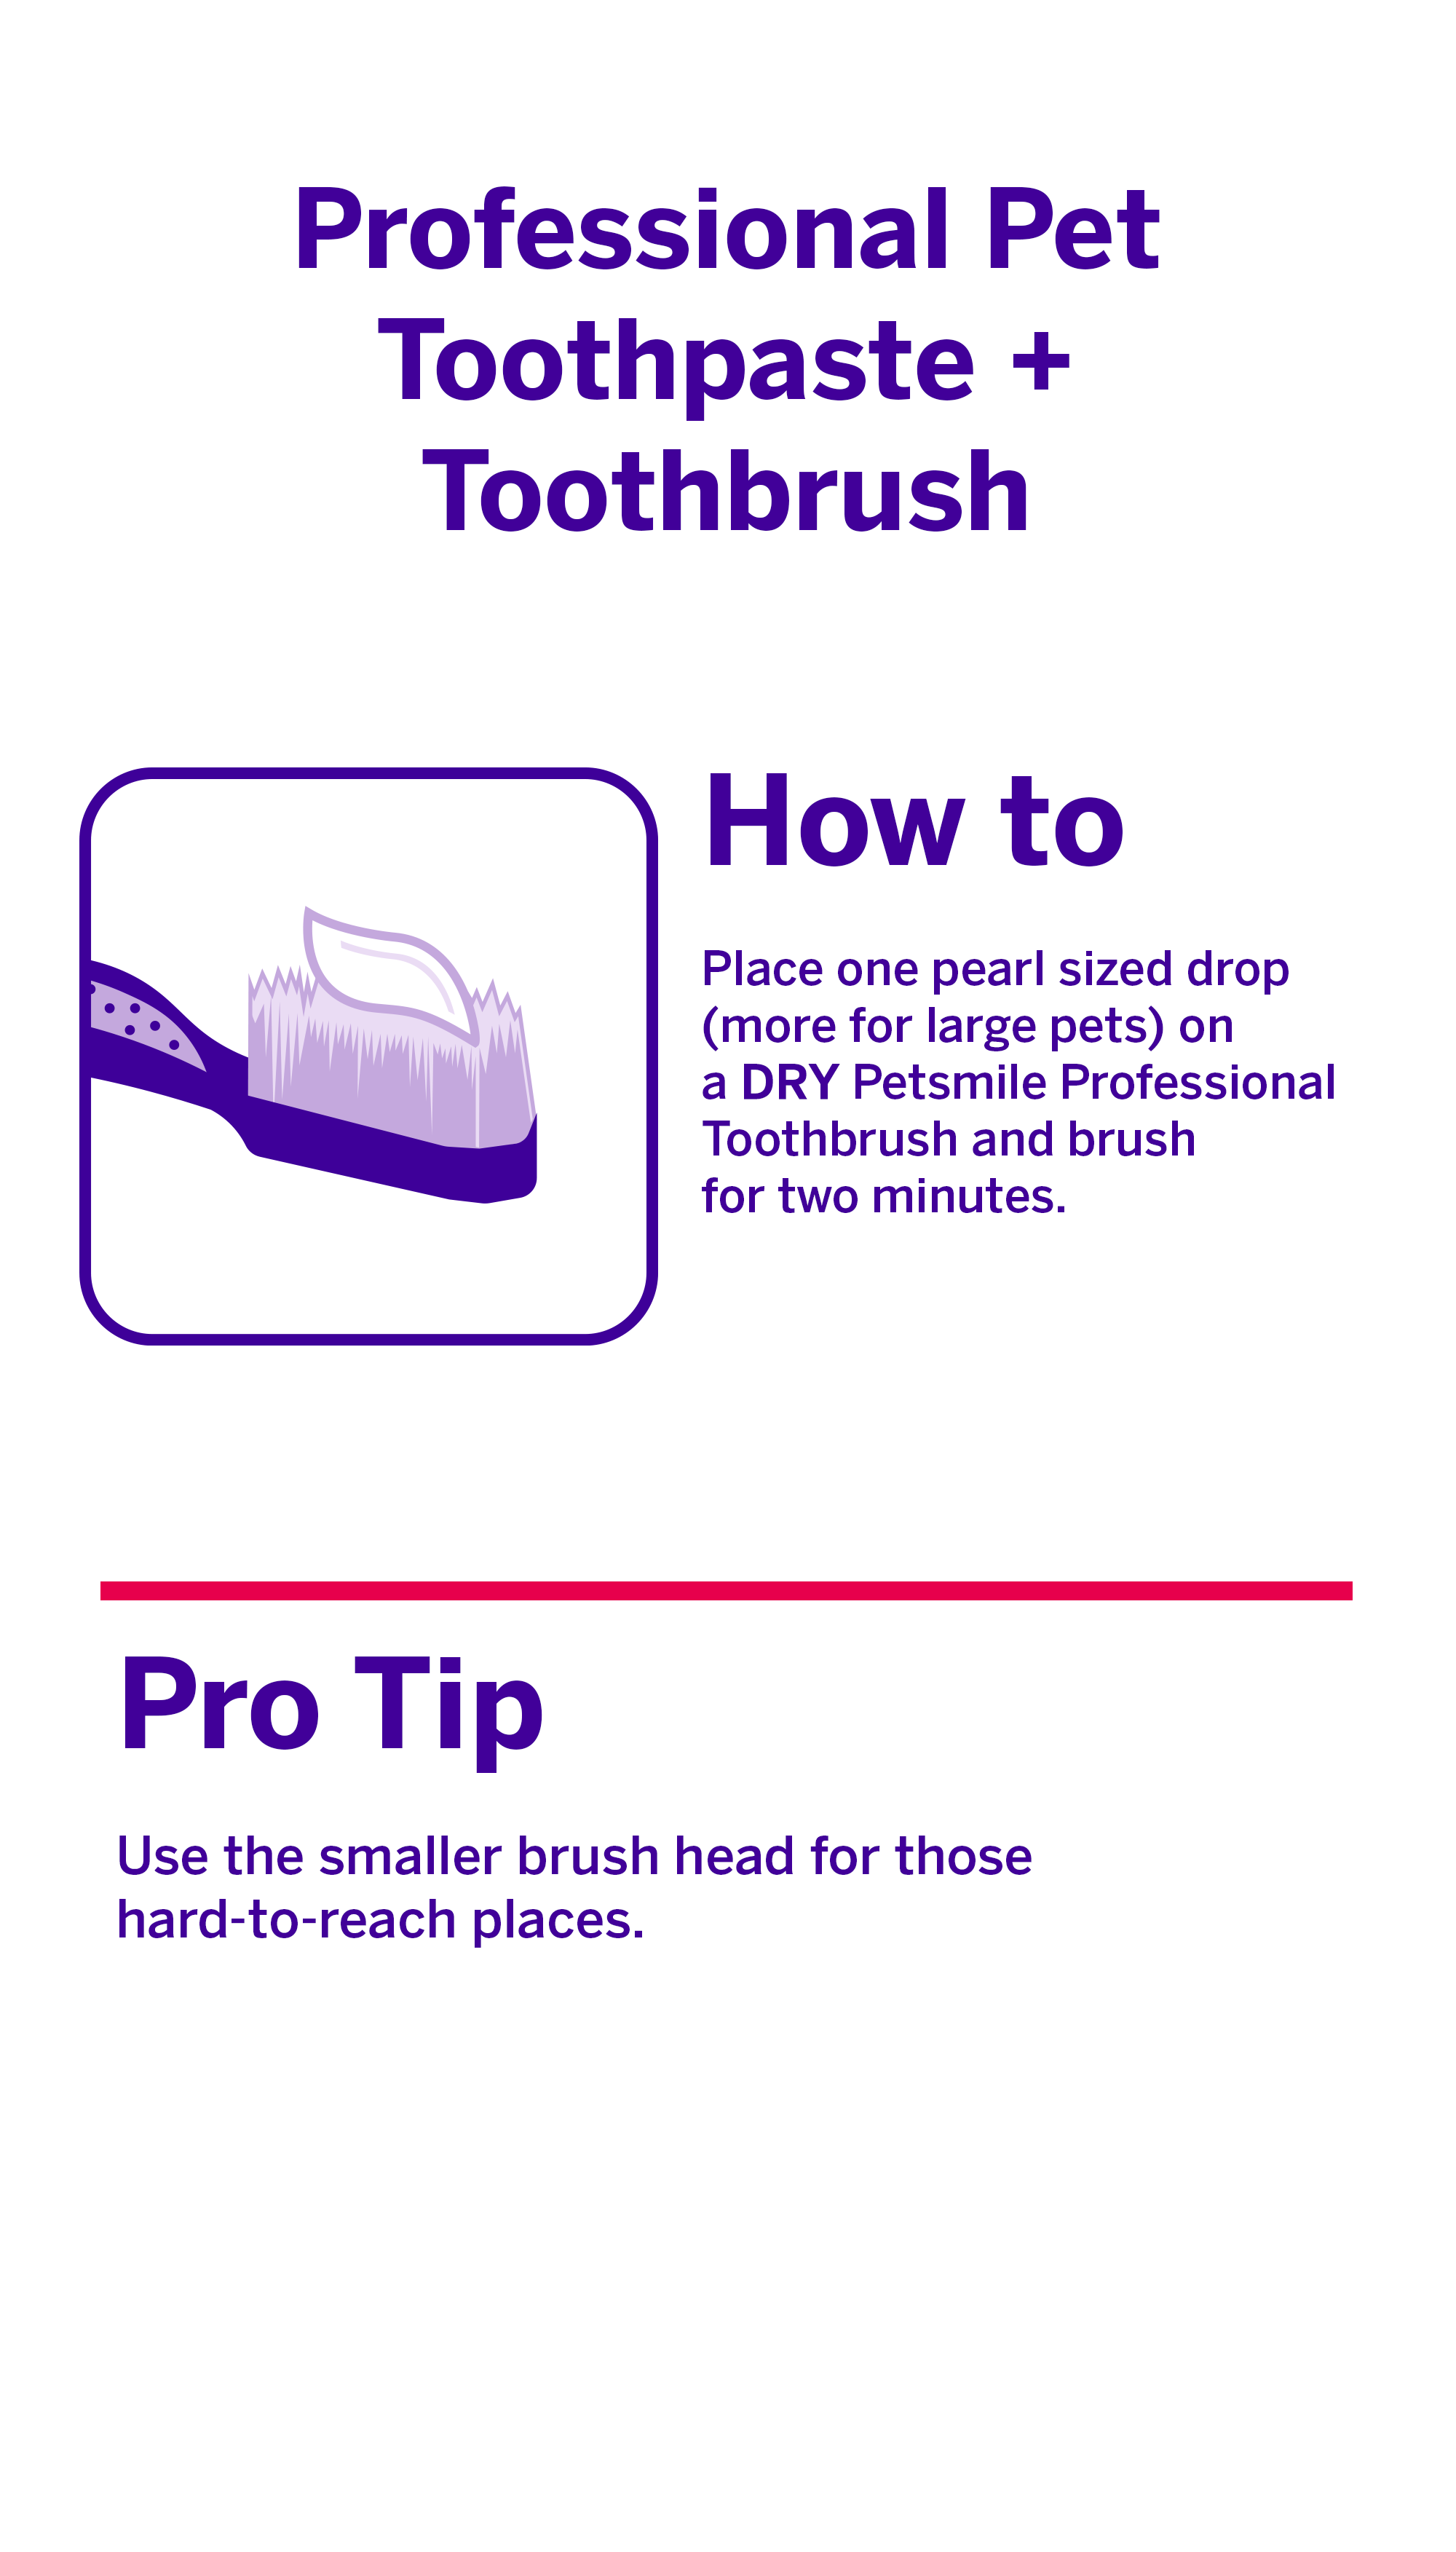 Pro Tip With Professional Pet Toothpaste + Toothbrush | Petsmile